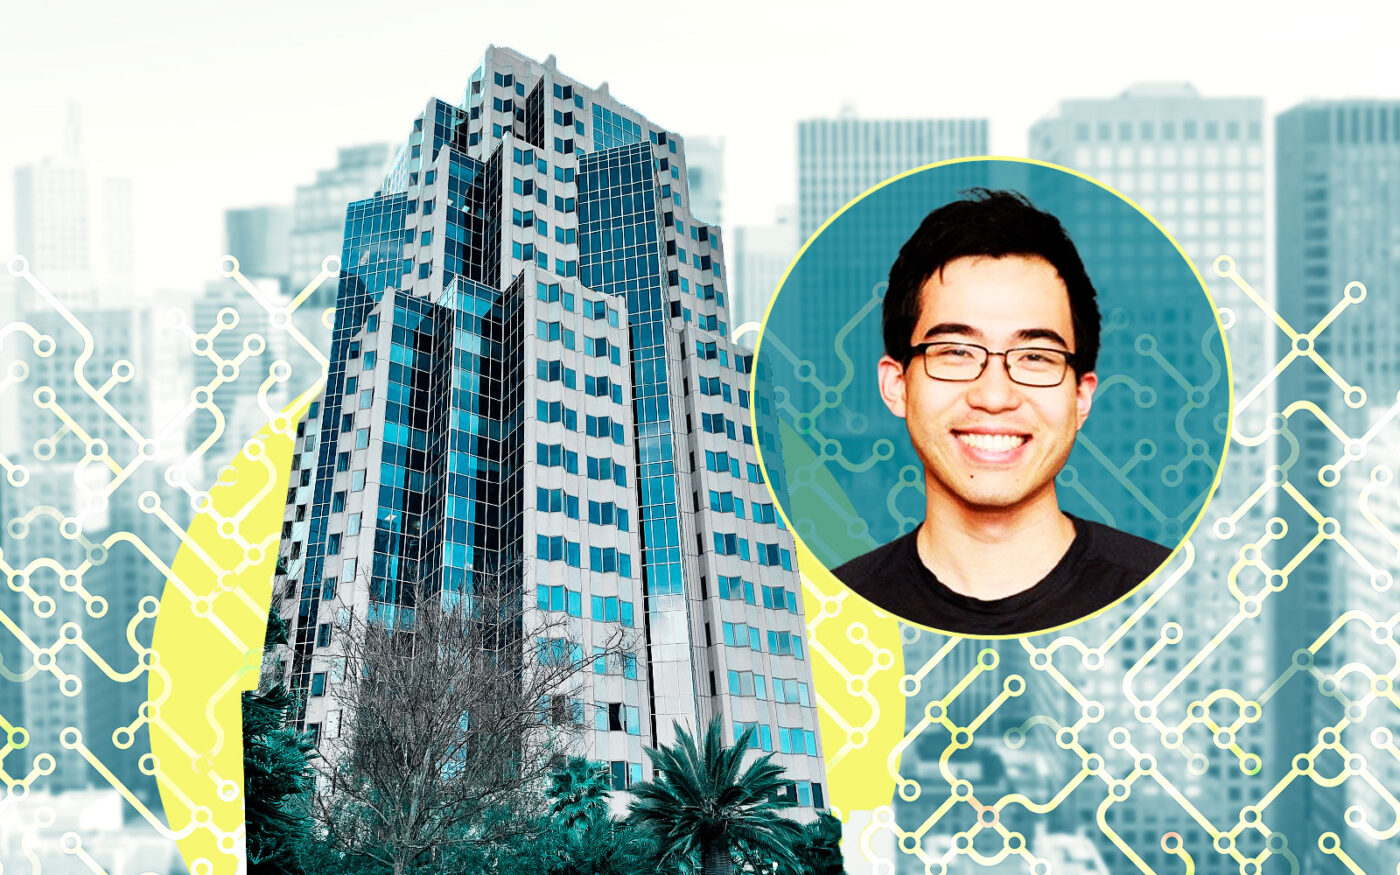 Hive's Kevin Guo and 100 First Street in San Francisco